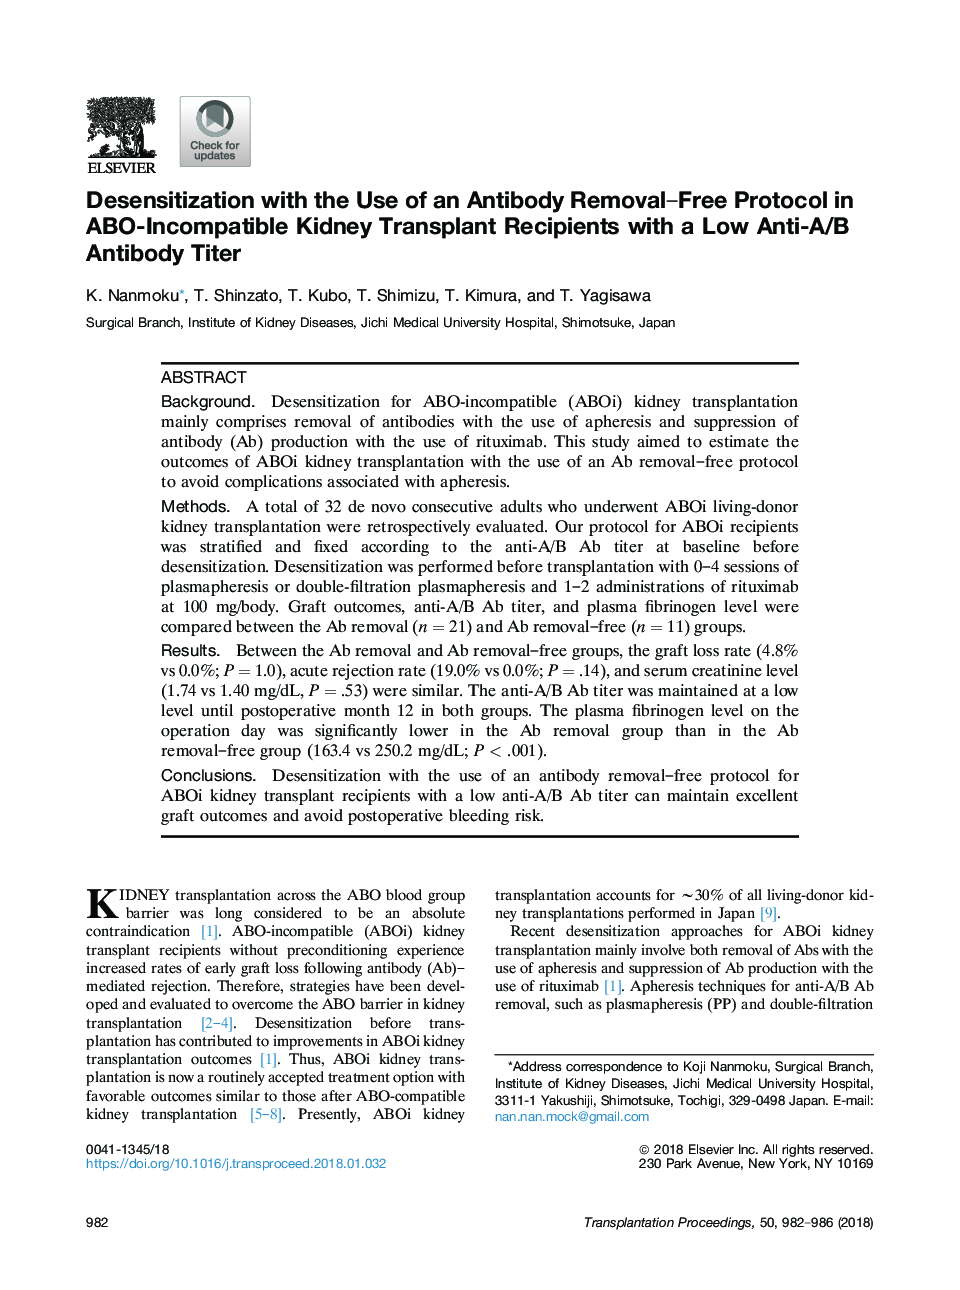 Desensitization with the Use of an Antibody Removal-Free Protocol in ABO-Incompatible Kidney Transplant Recipients with a Low Anti-A/B Antibody Titer